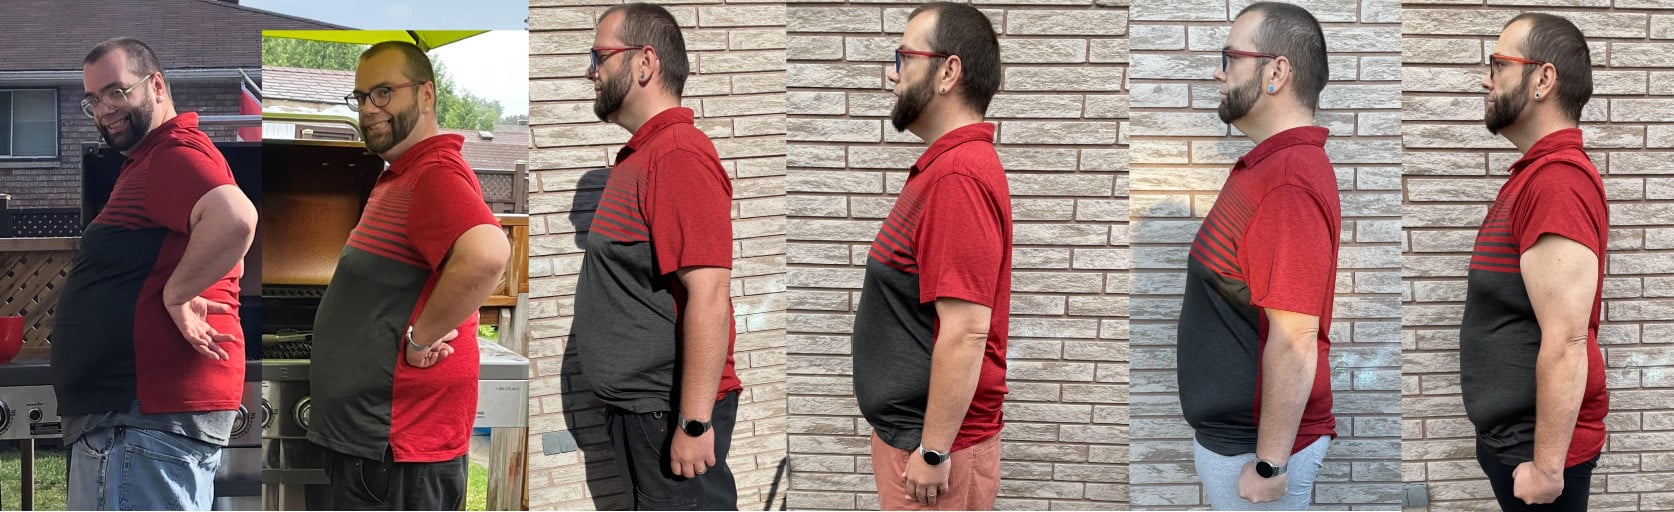 5 feet 10 Male Before and After 80 lbs Weight Loss 299 lbs to 219 lbs